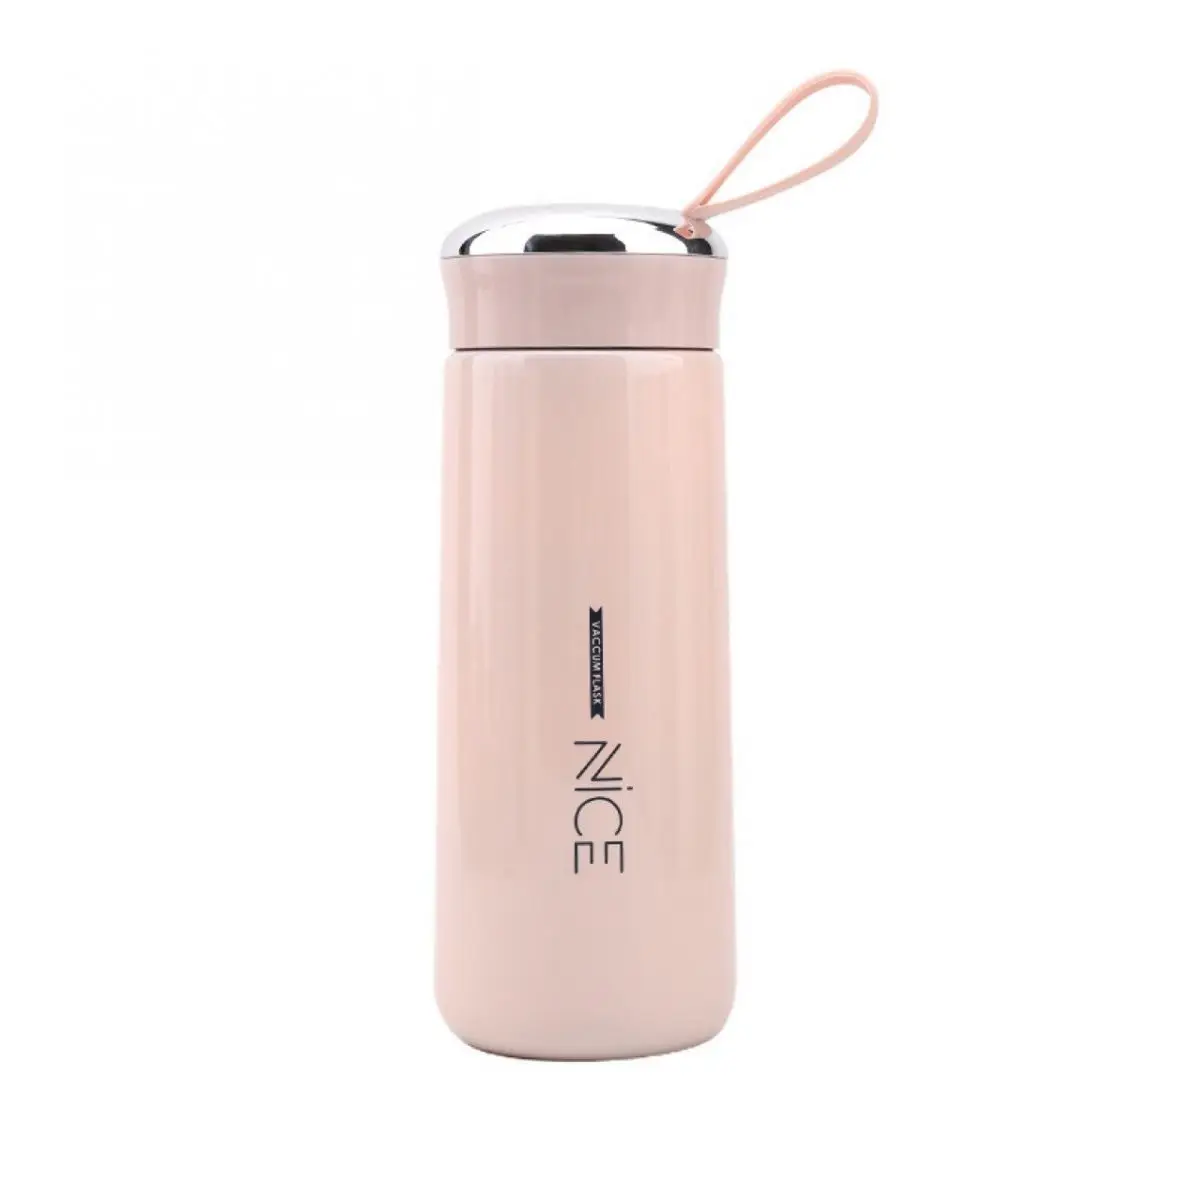 hot sale creative fashion thermos cup new arrival custom logo stainless steel cup high temperature resistance vacuum cup